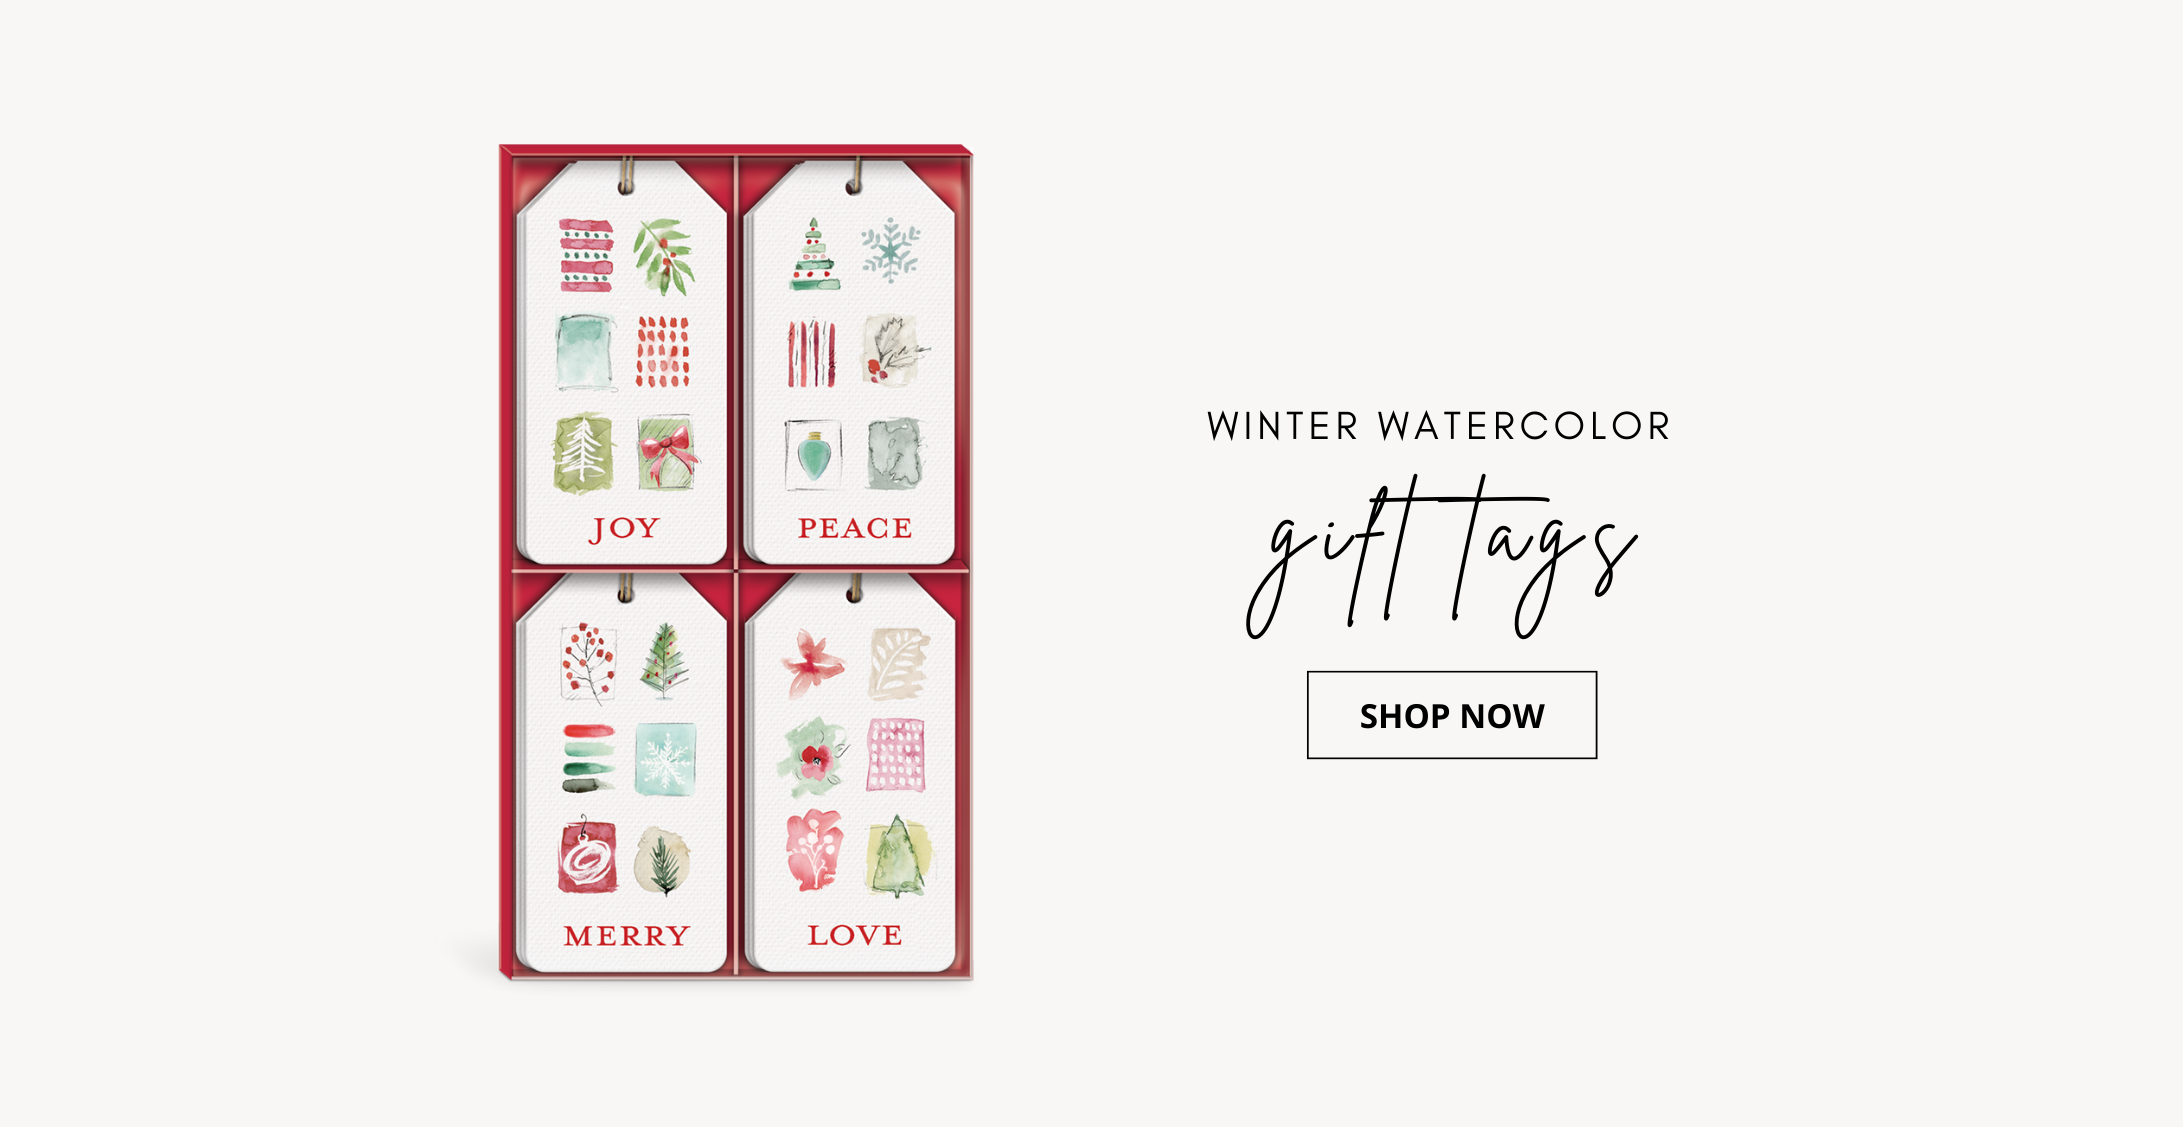   product category holiday holiday gift bags tags ?fwp_style=gift tags